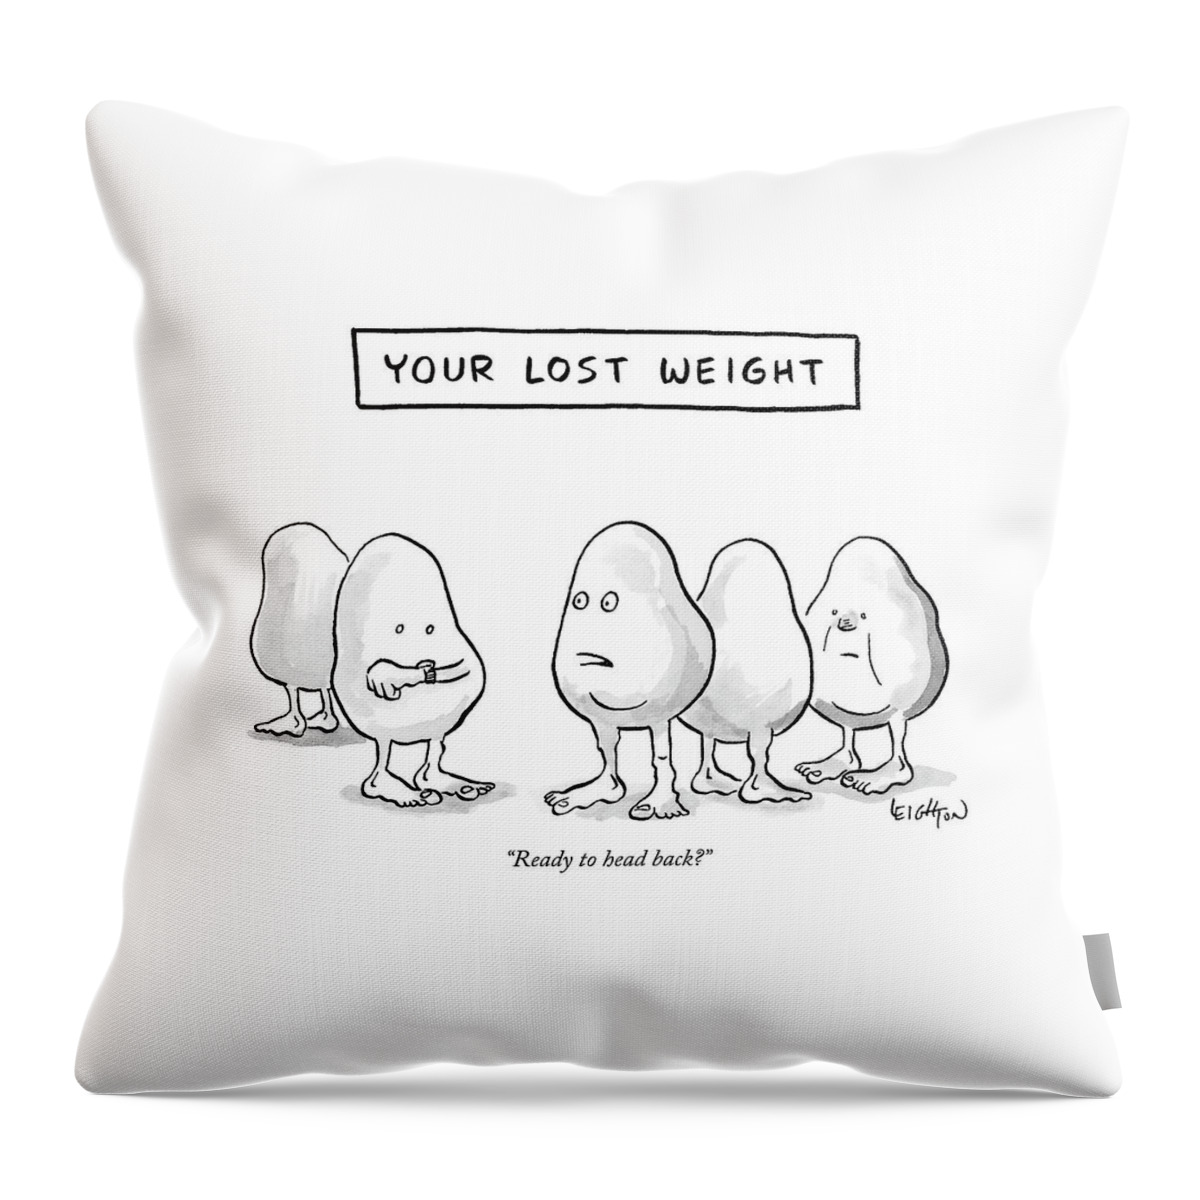 Your Lost Weight Throw Pillow